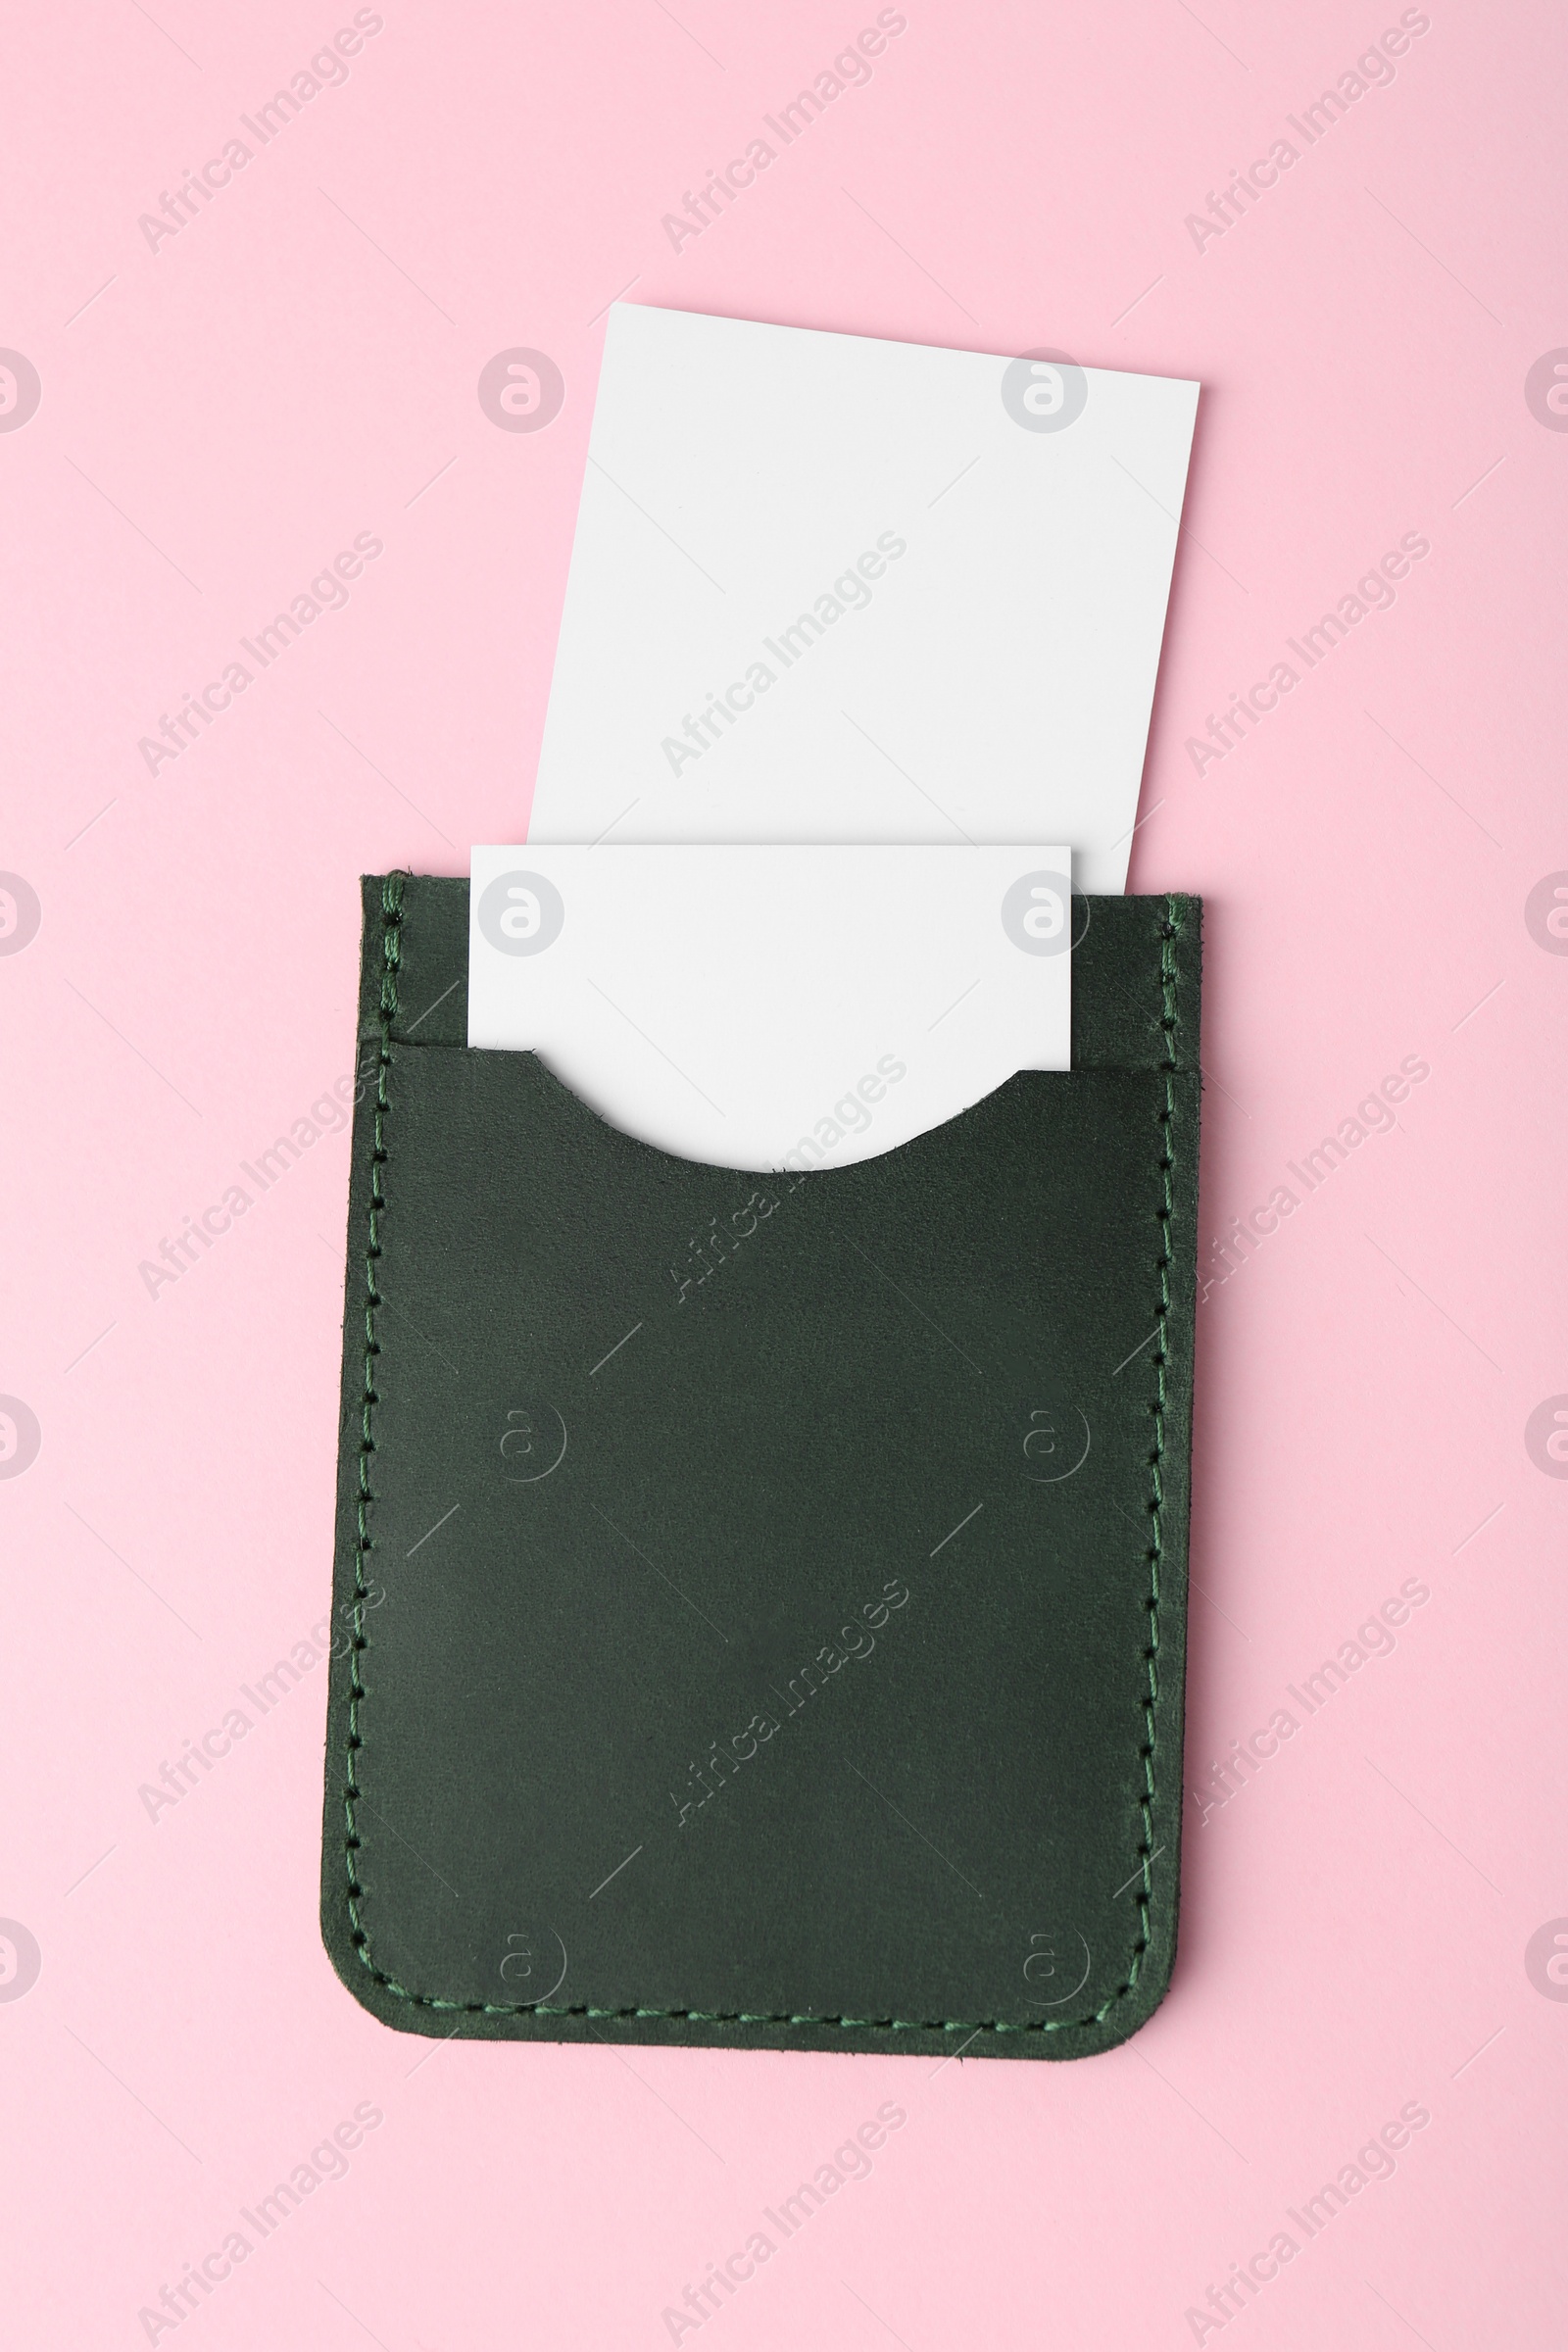 Photo of Leather business card holder with blank cards on pink background, top view